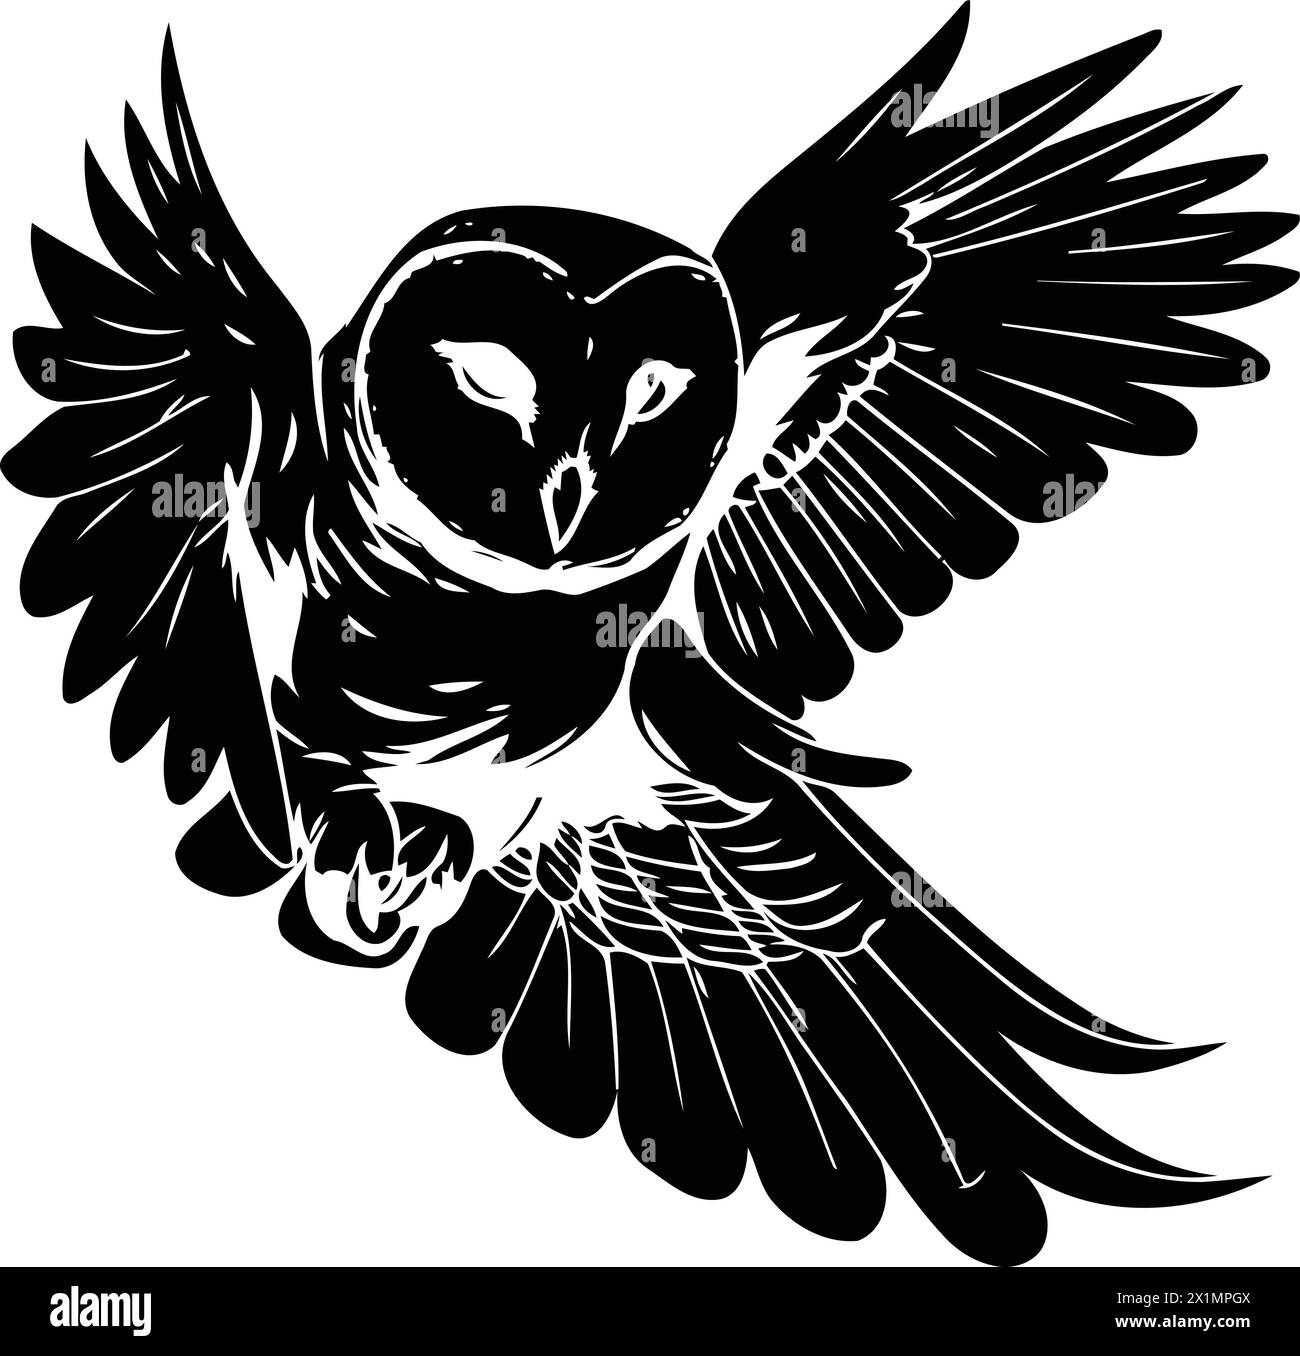 Owl hand drawn vector illustration isolated on gray background. For tattoo or t-shirt design. Stock Vector